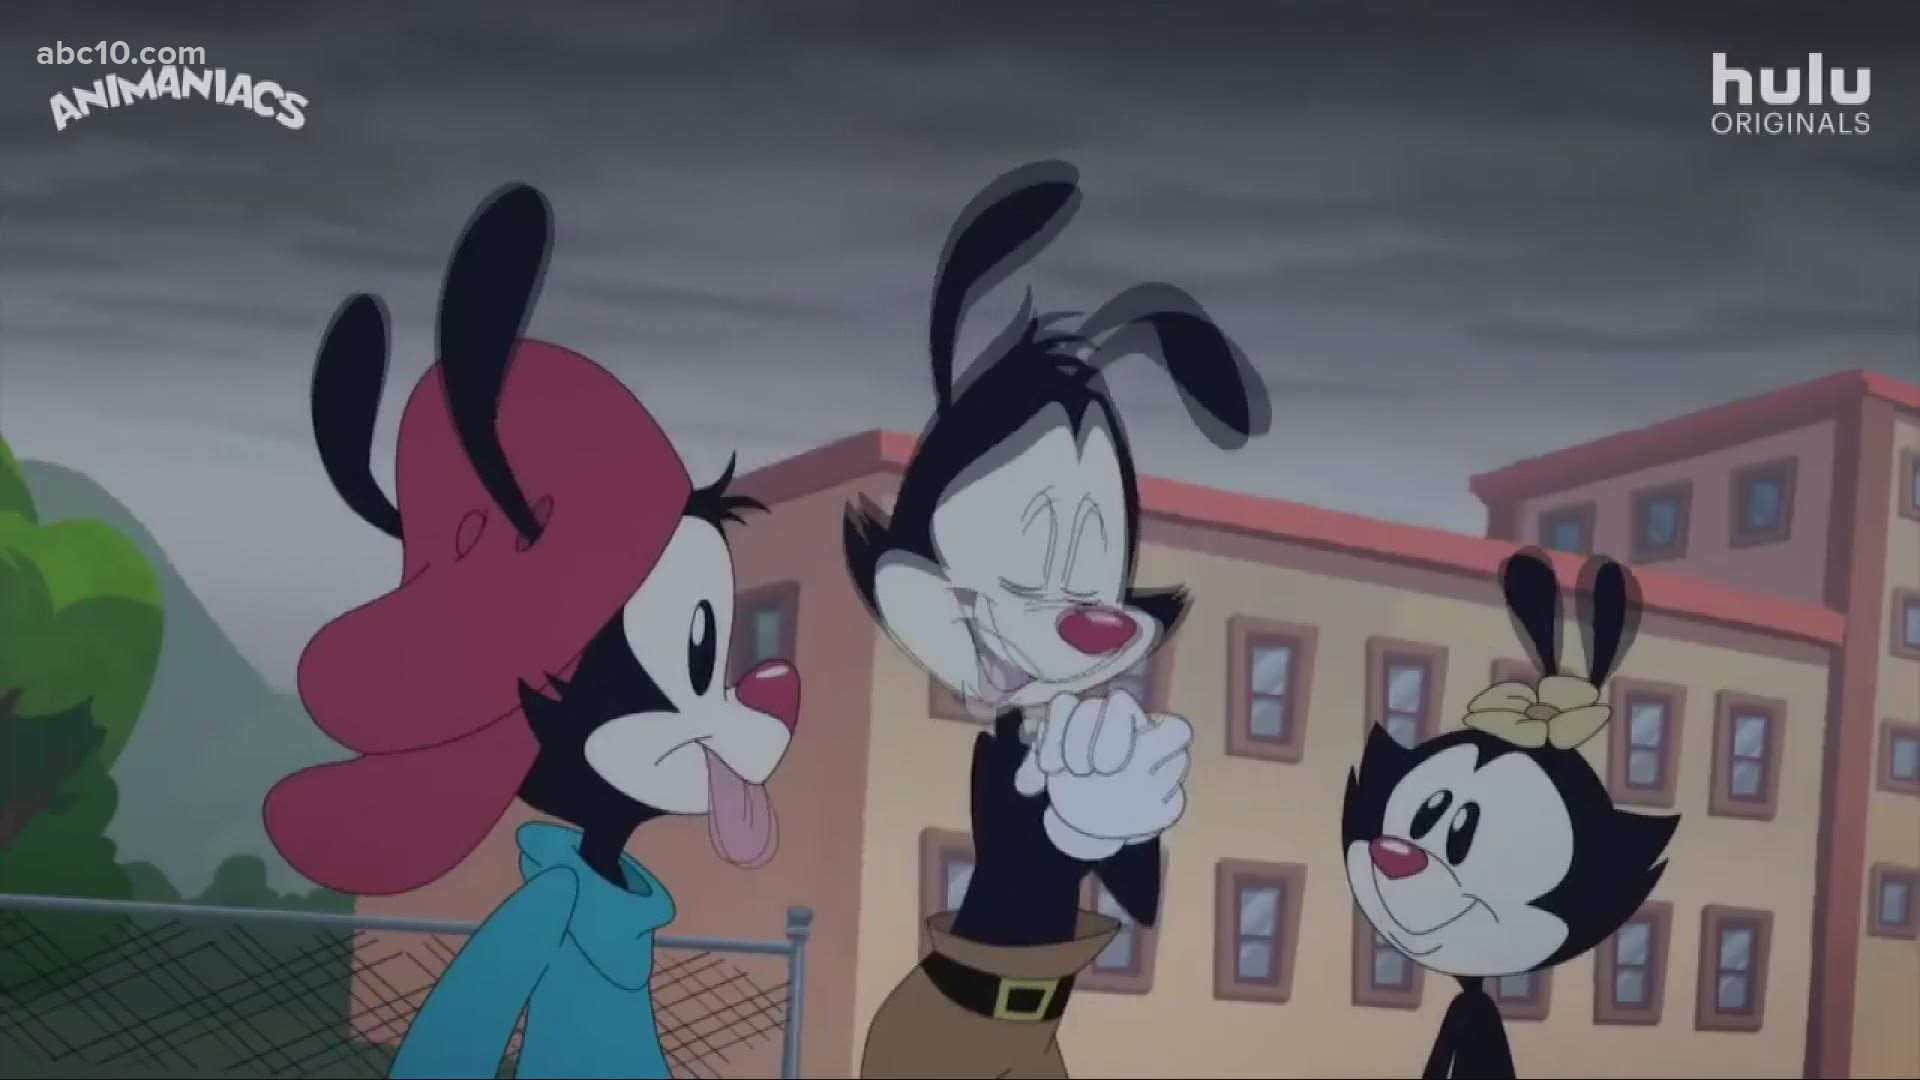 Mark S. Allen talks with Jess Harnell and Wellesley Wild about the new 'Animaniacs' reboot that starts streaming on Friday.